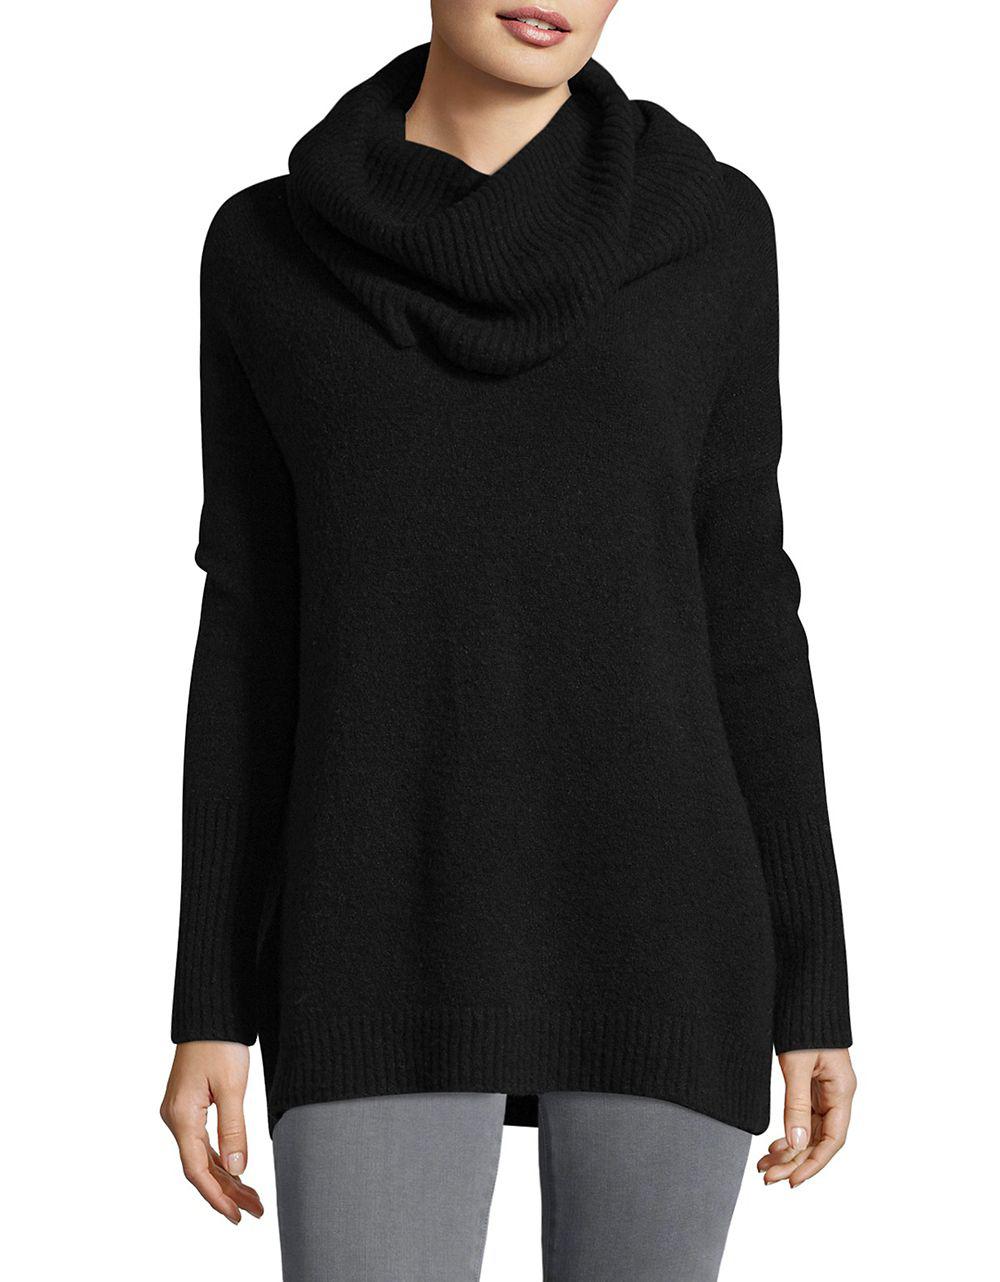 French connection Textured Cowlneck Sweater in Black | Lyst